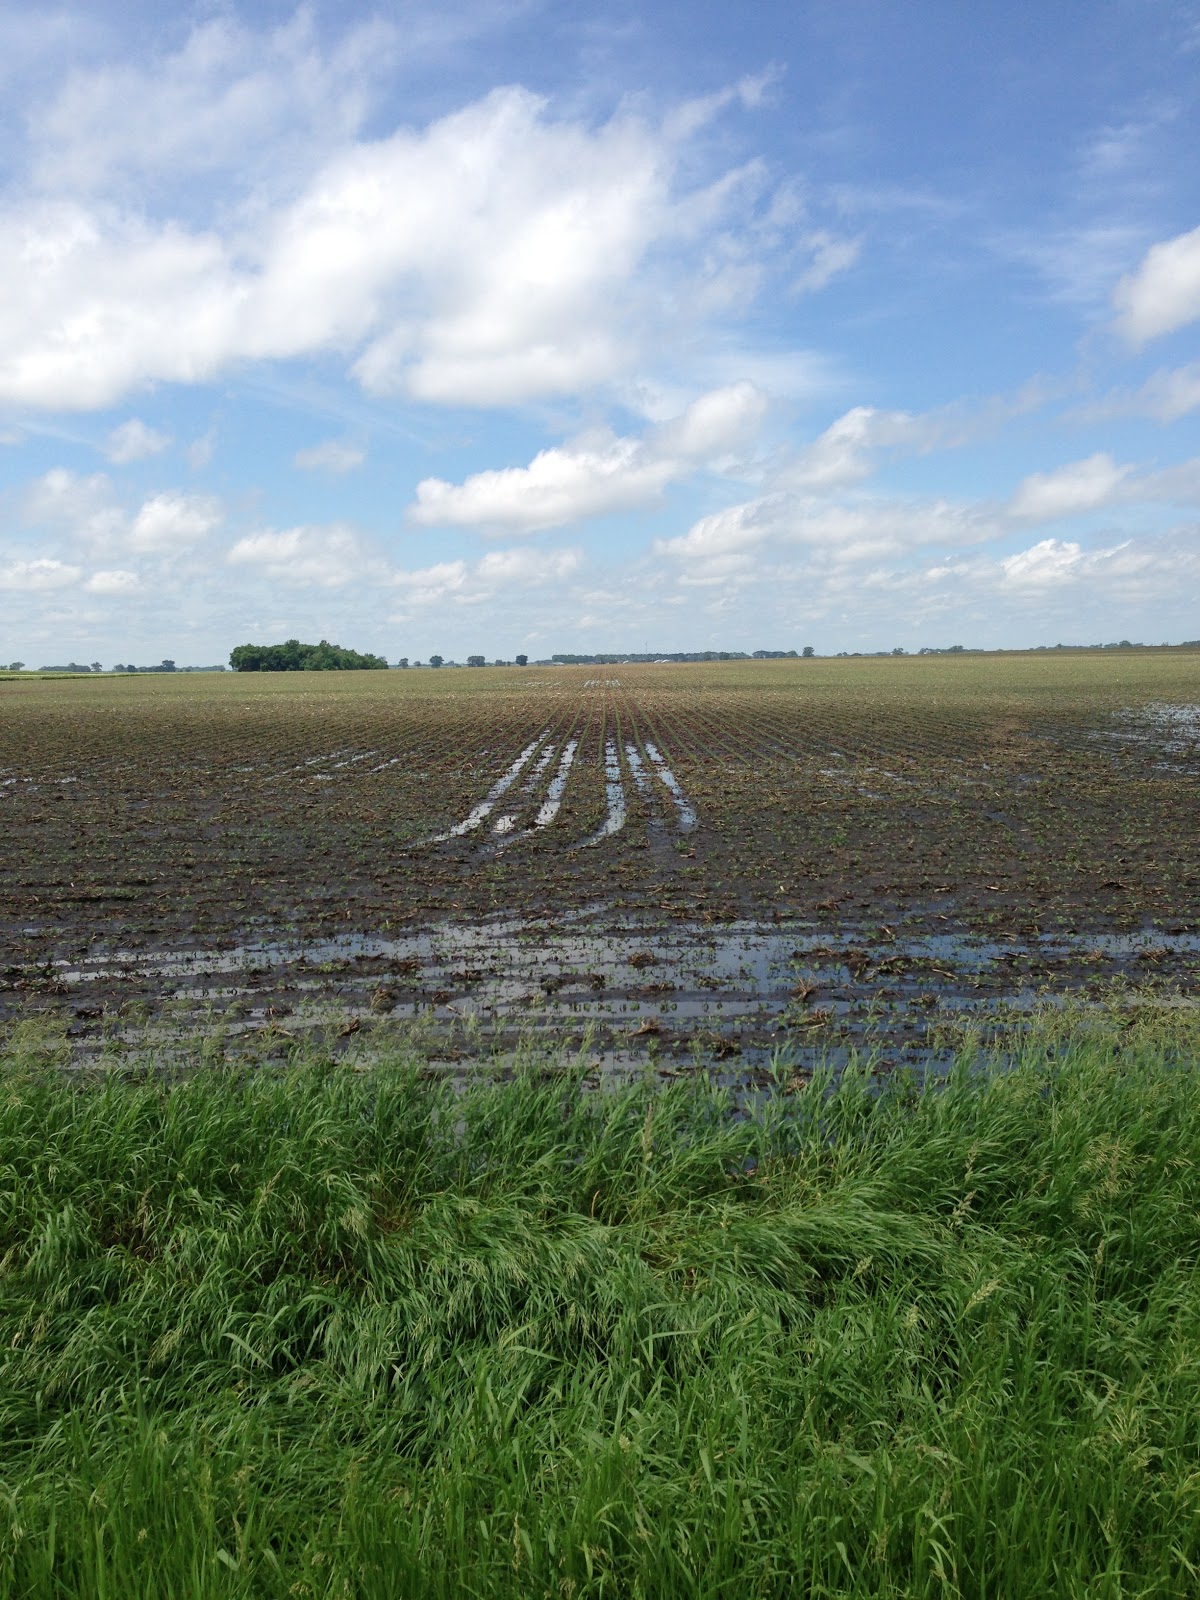 young farm crop with standing water in wheel tracks.